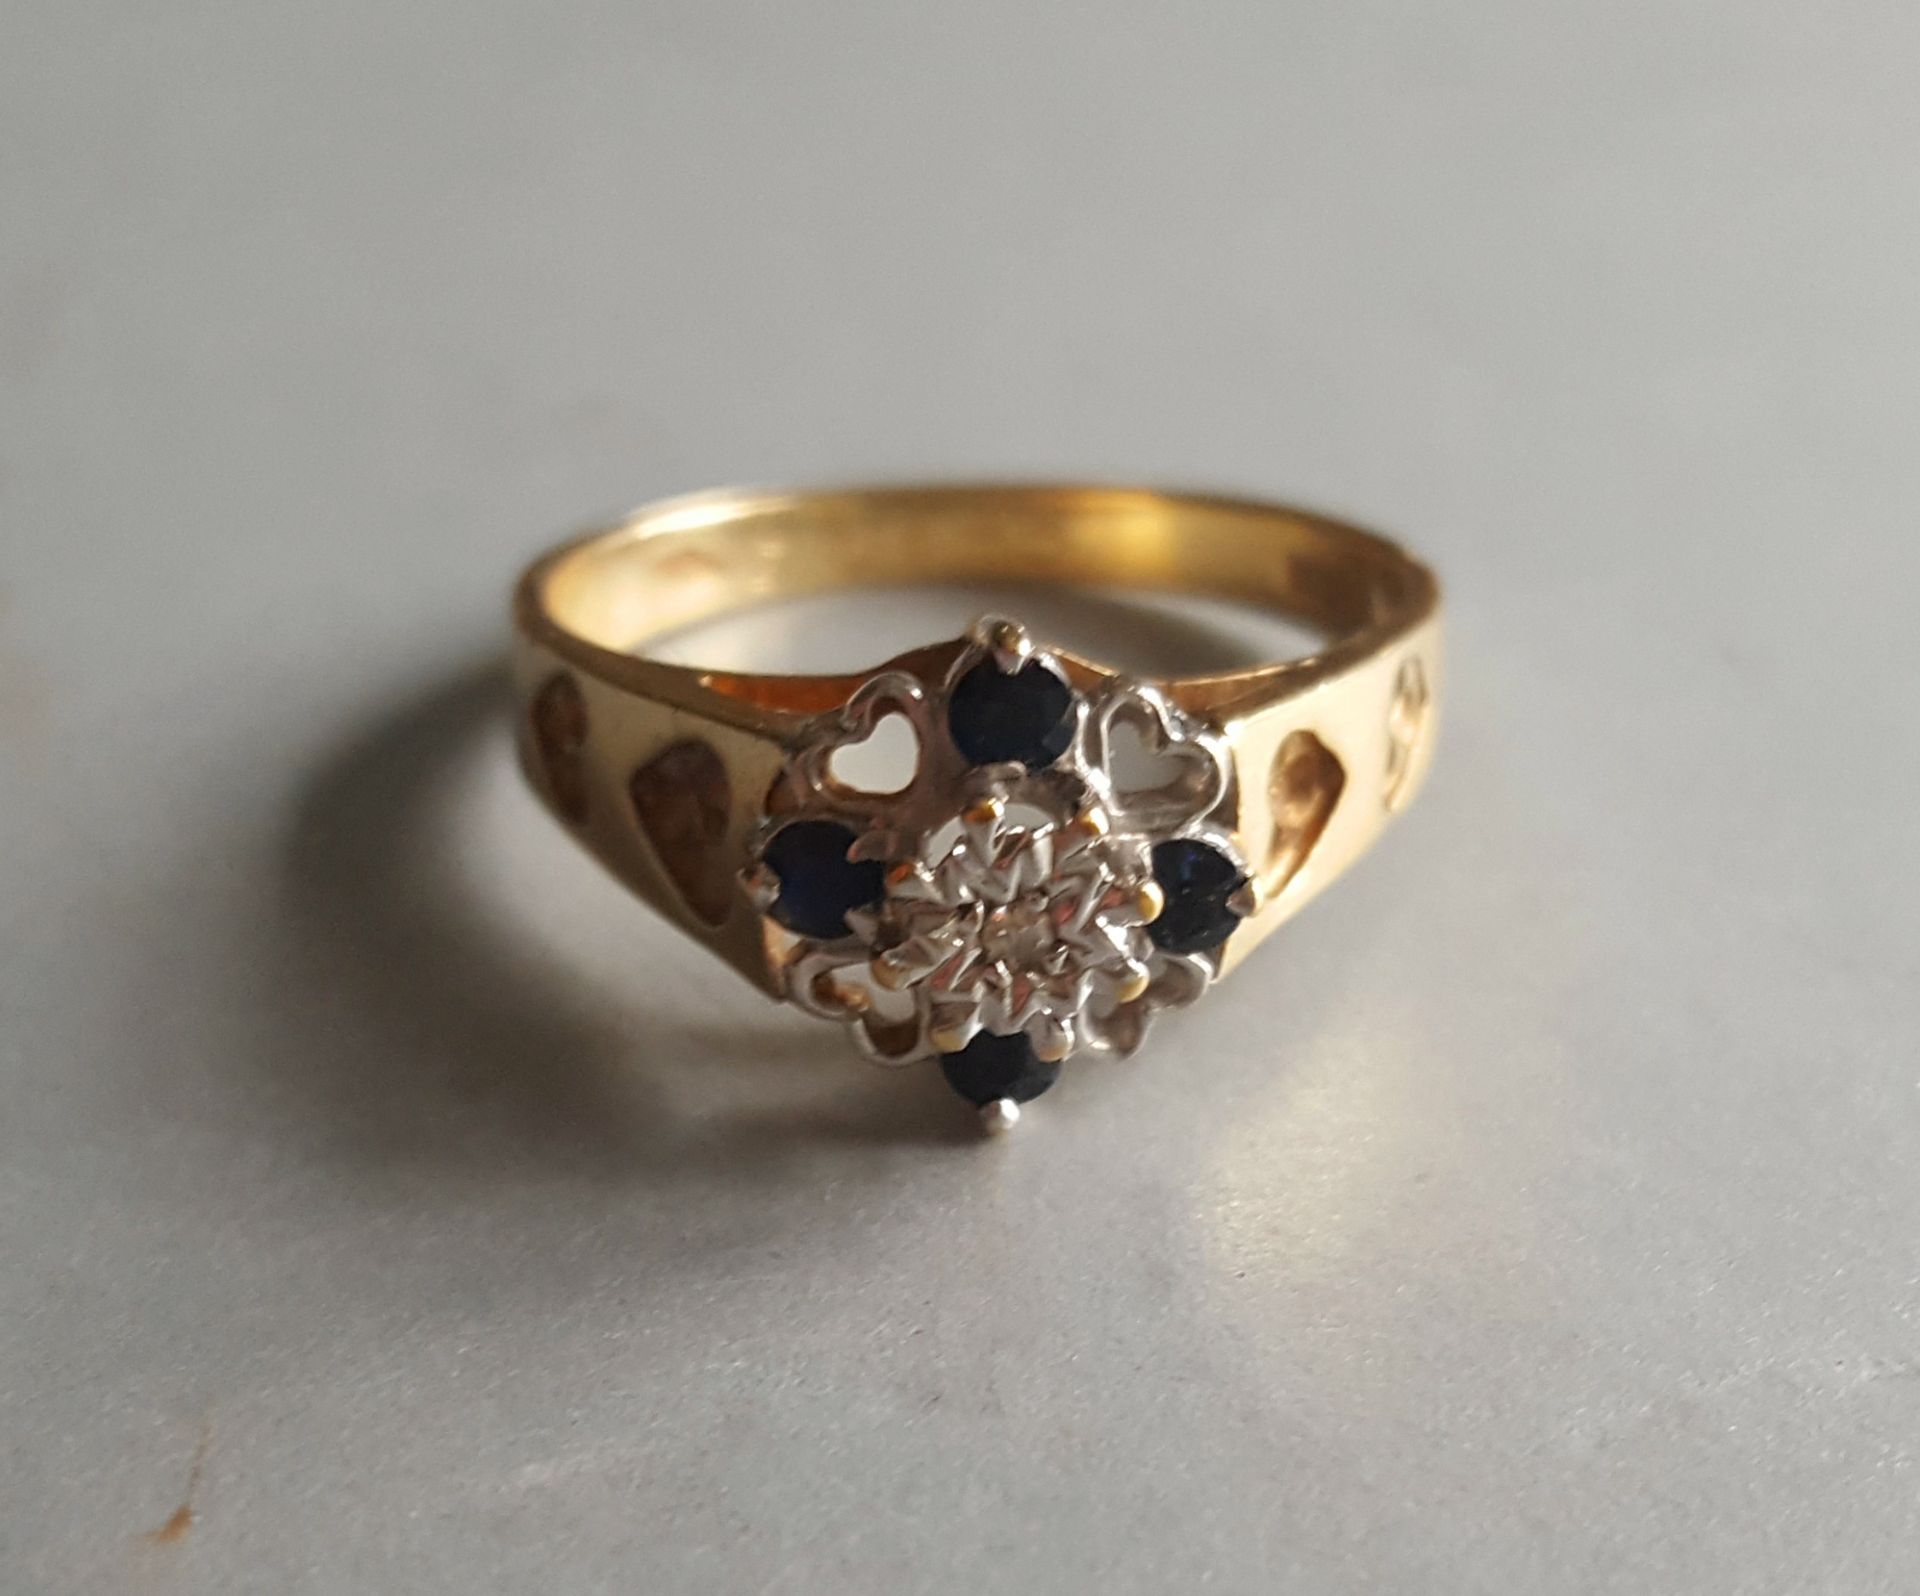 Vintage 9ct Gold Diamond & Sapphire Ring Sheffield 1984 Size 'O' - Image 2 of 3